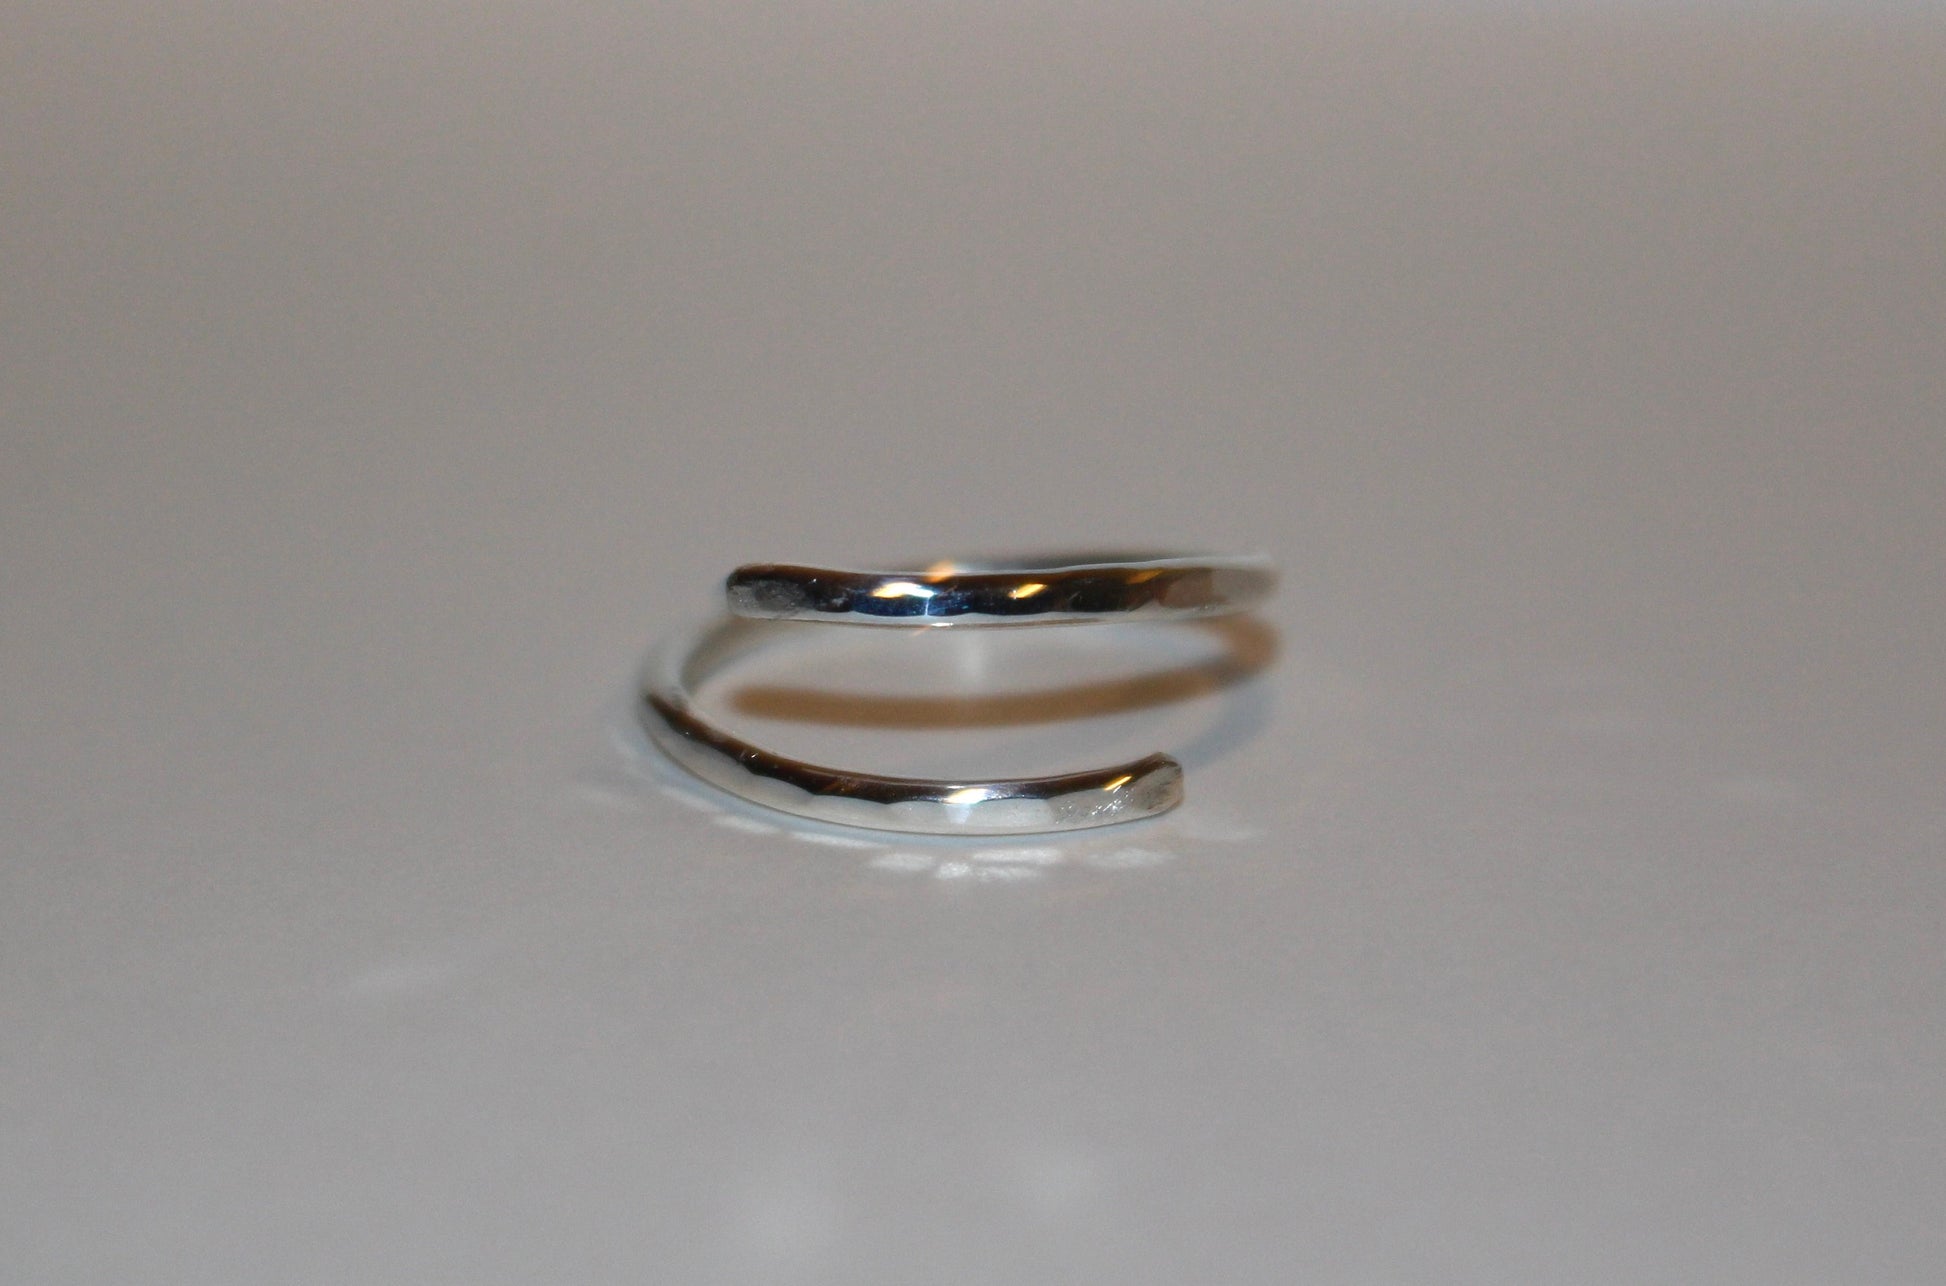 Wrap Around Adjustable Sterling Silver Ring - Can be worn in two ways!